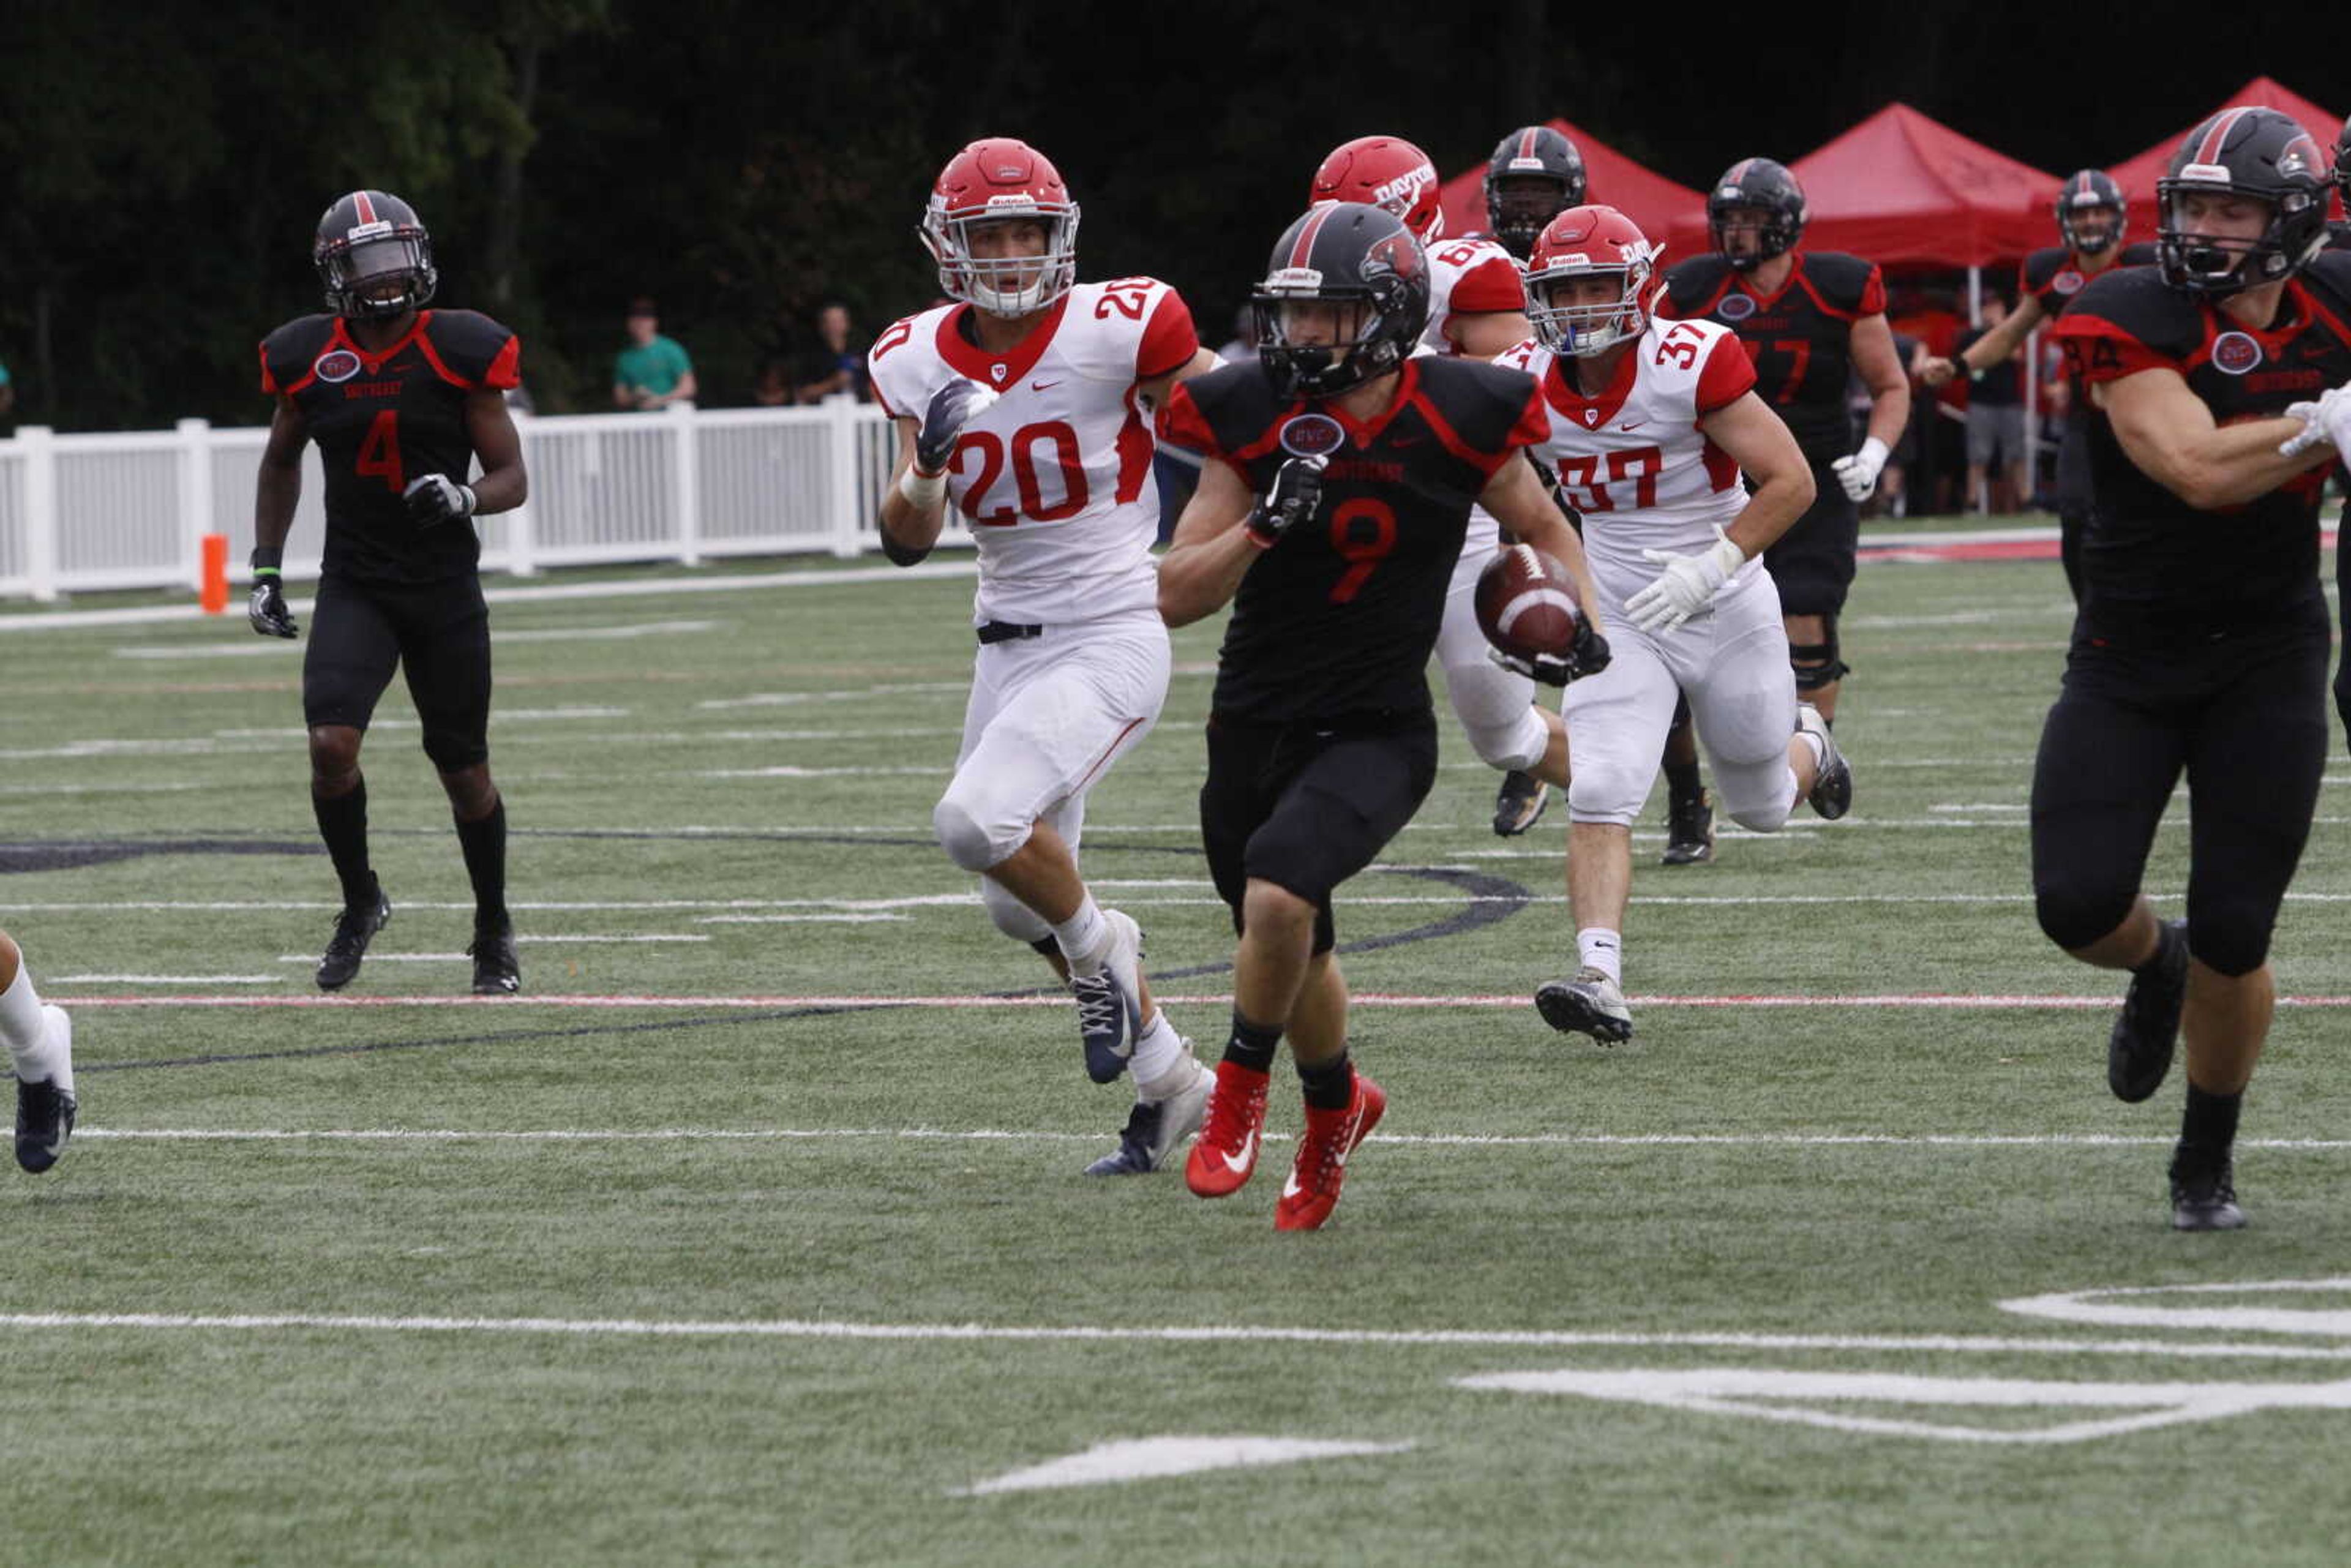 Sophomore receiver Zack Smith takes a reception 73 yards to the end zone in the second half.